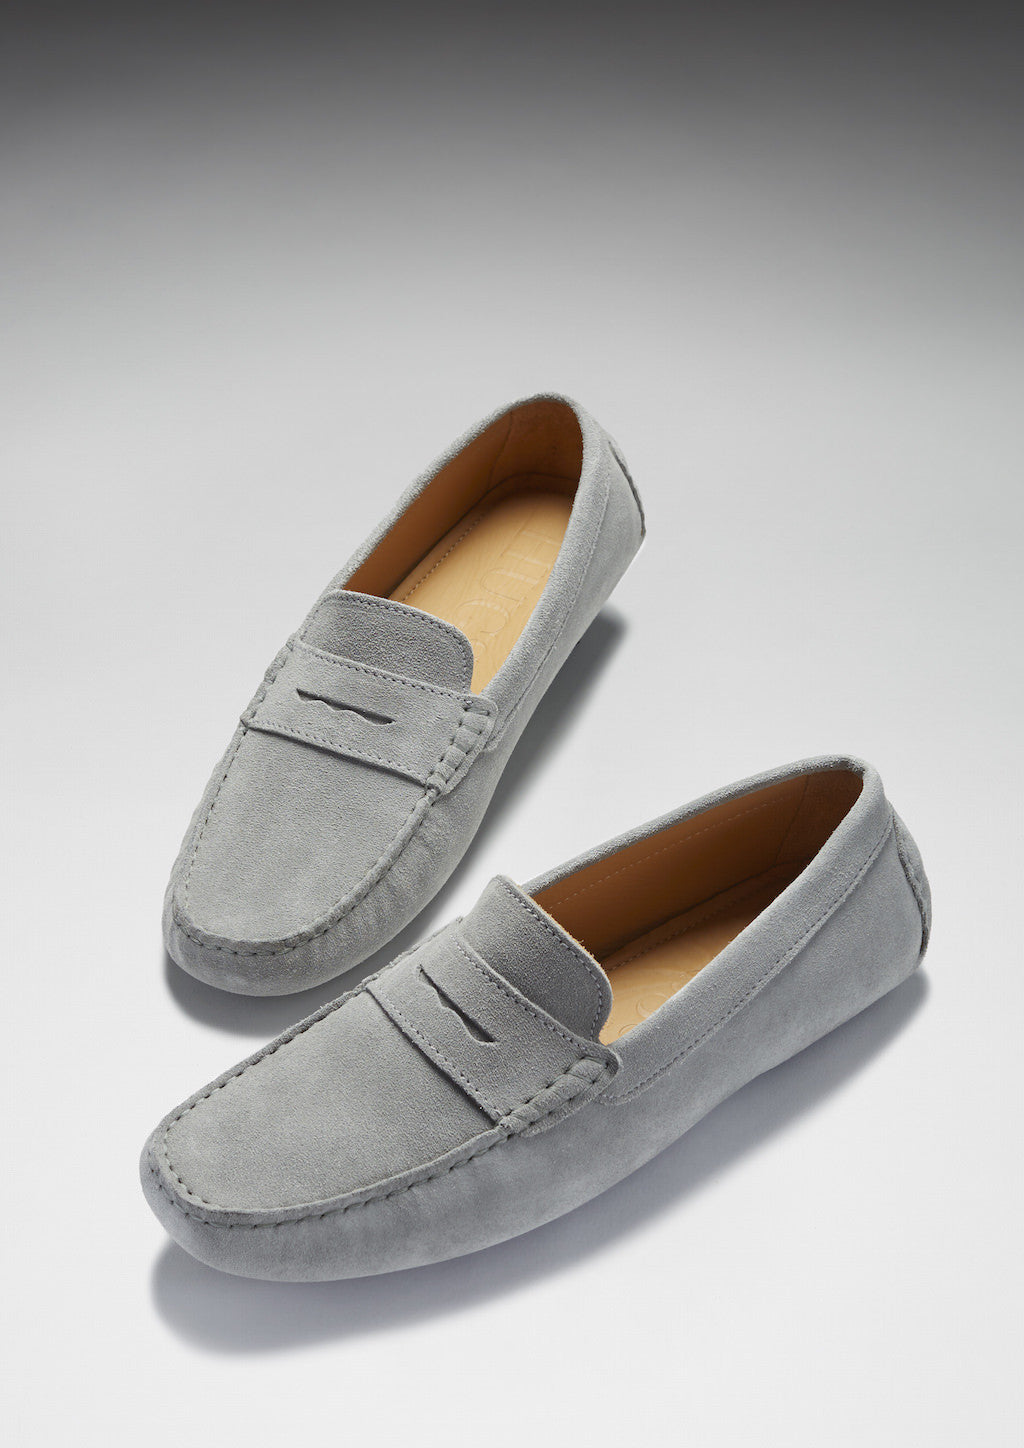 Loafers, dove grey suede - Hugs & Co.